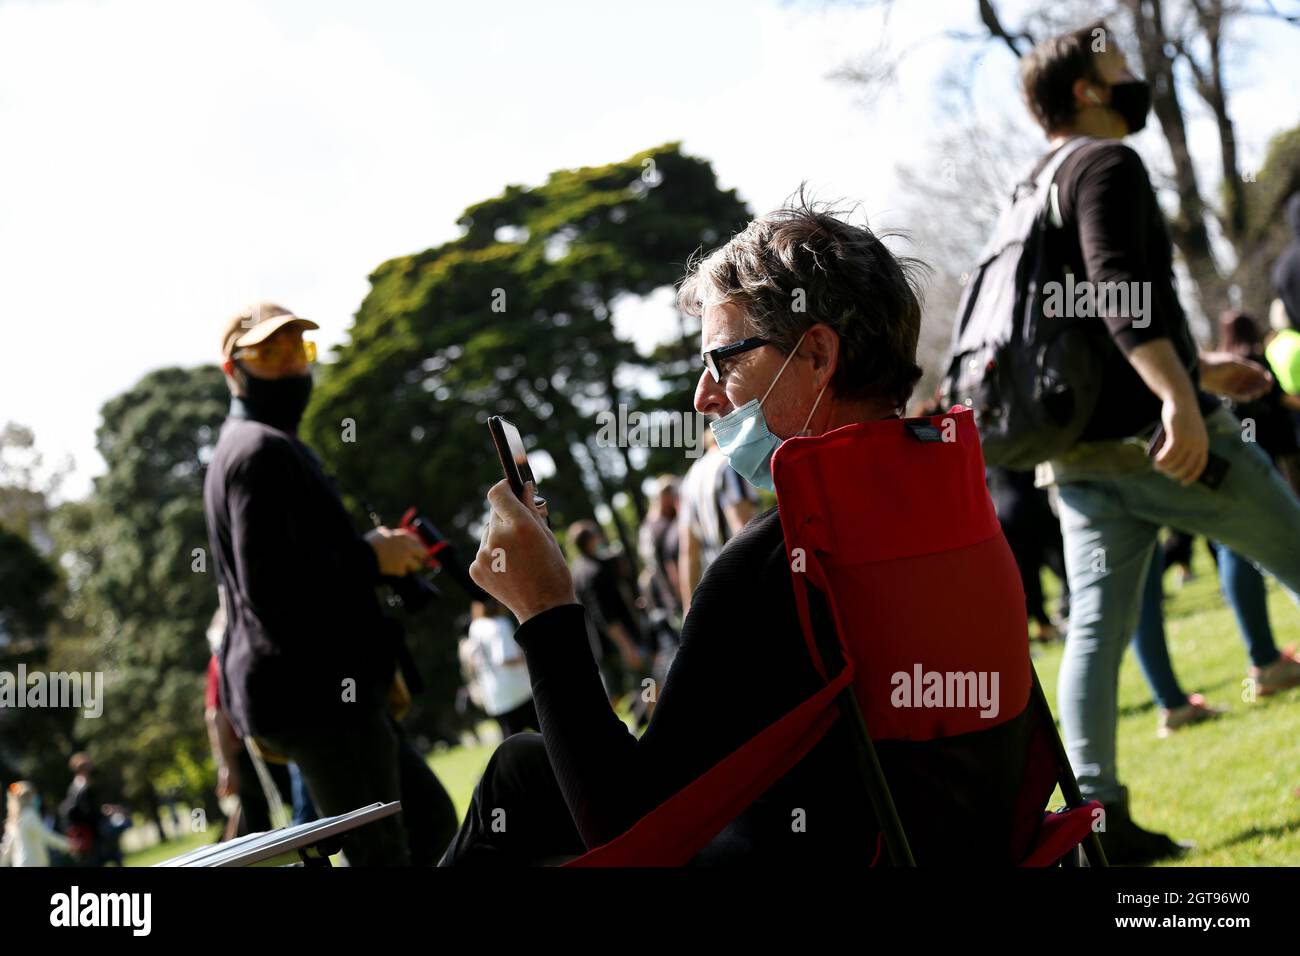 Melbourne, Australia, 2 October, 2021. A lady sits in a chair watching during the 'Rise Up! Melbourne Rally for Health Rights and Freedom' in The Royal Botanic Gardens. Melbourne continues its hard lockdowns following Premier Daniel Announcement that all authorized workers must be mandatorily vaccinated by October 15. Credit: Dave Hewison/Speed Media/Alamy Live News Stock Photo